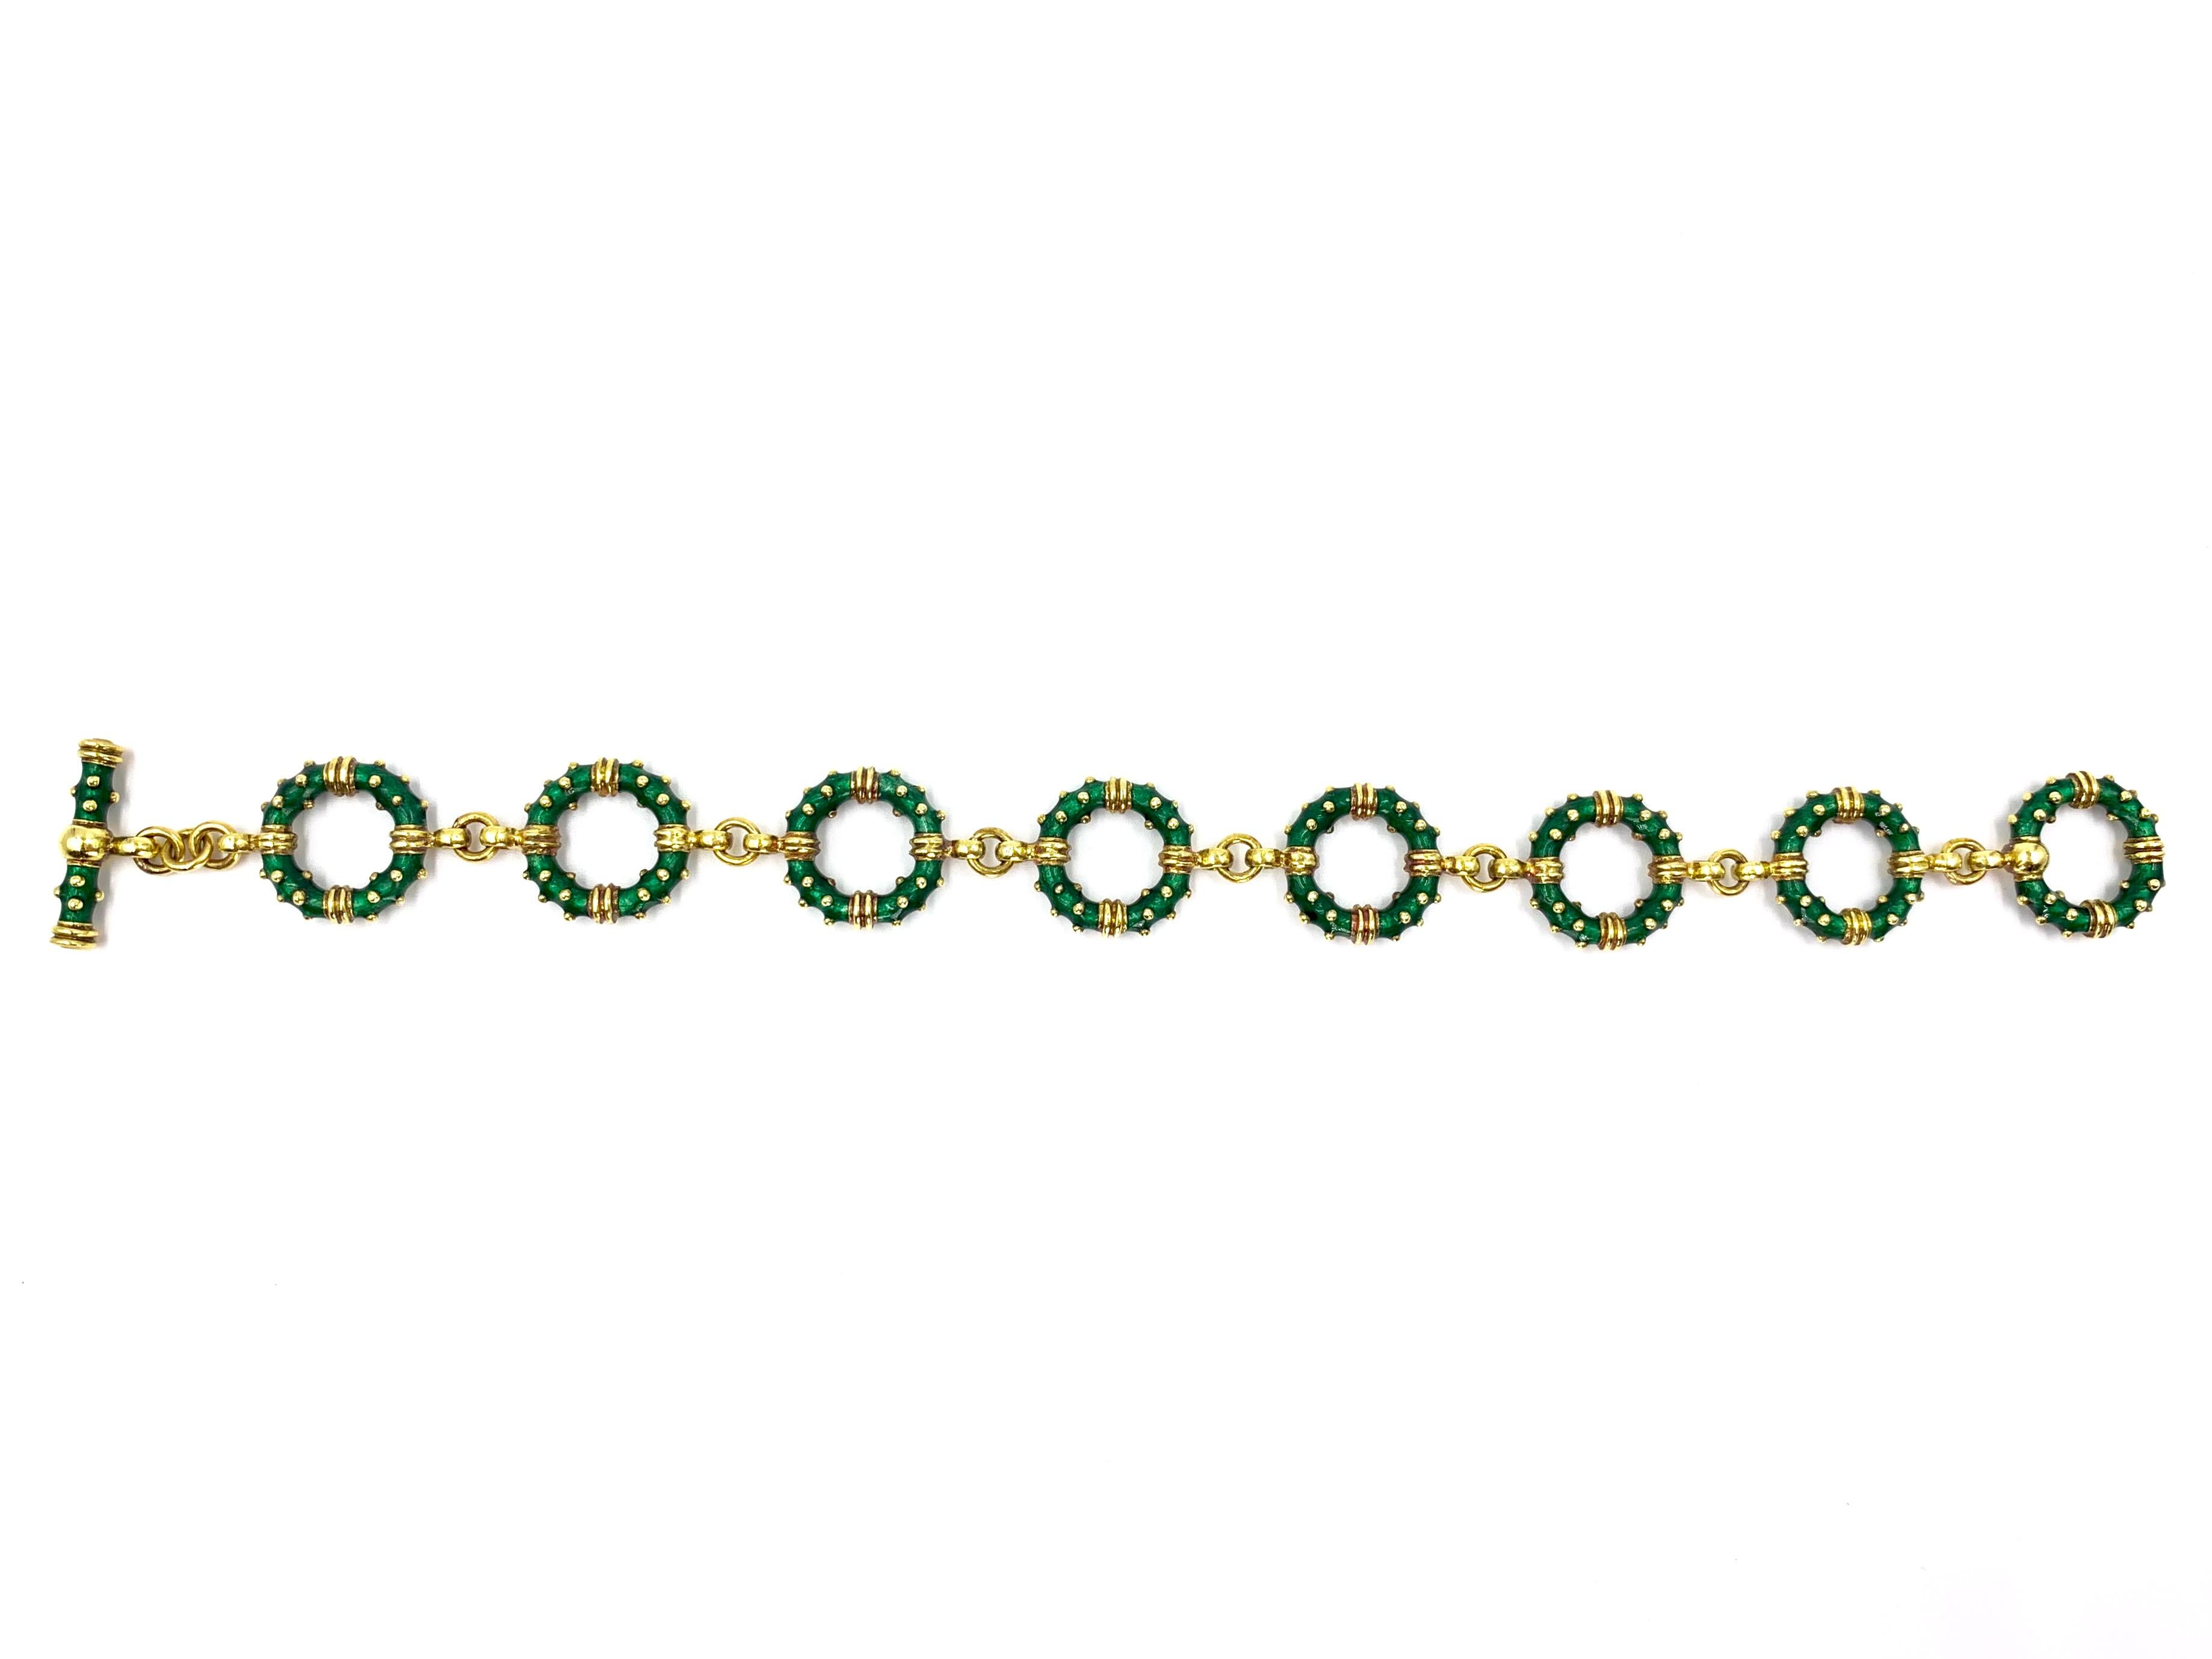 18 Karat yellow gold and beautiful, rich green enamel circle linked toggle bracelet by Hildalgo. Bracelet features eight 11mm round links with the signature Hidalgo textured polished gold beading throughout. Green color is a beautiful shade of